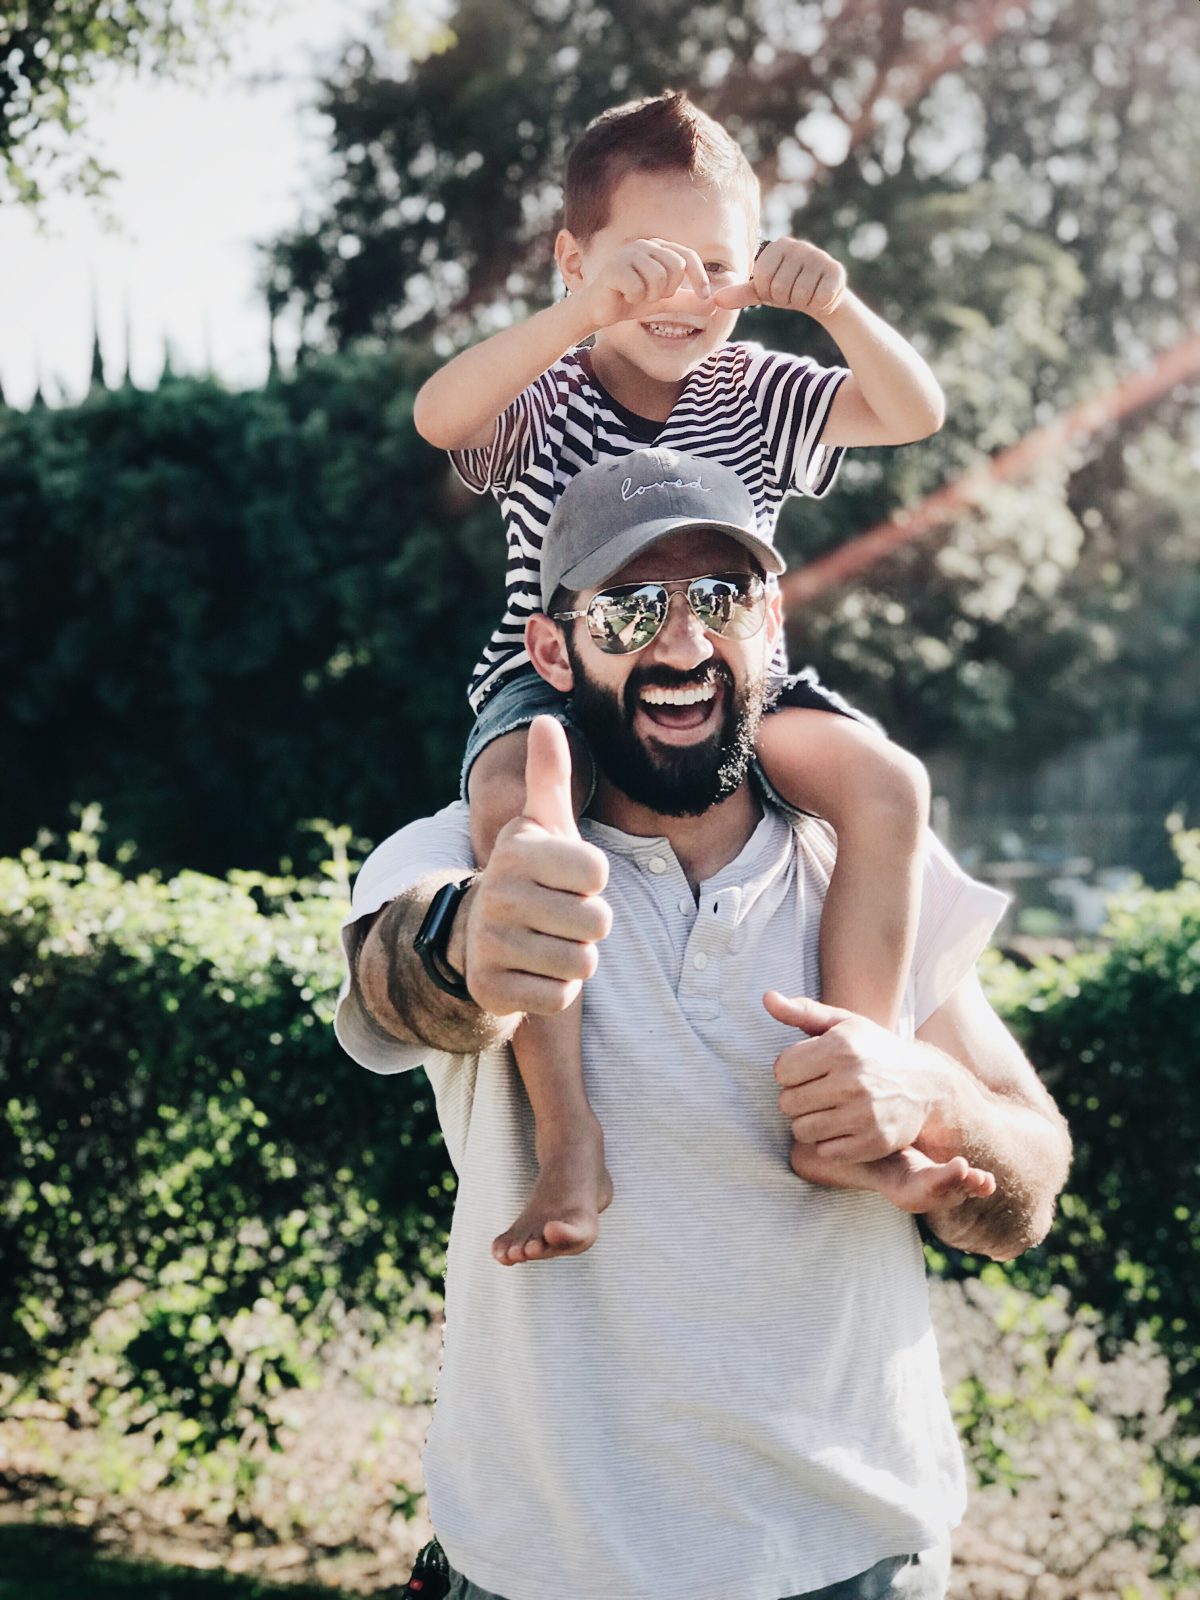 35+ Greatest Father's Day Ideas For 5-Year-Olds